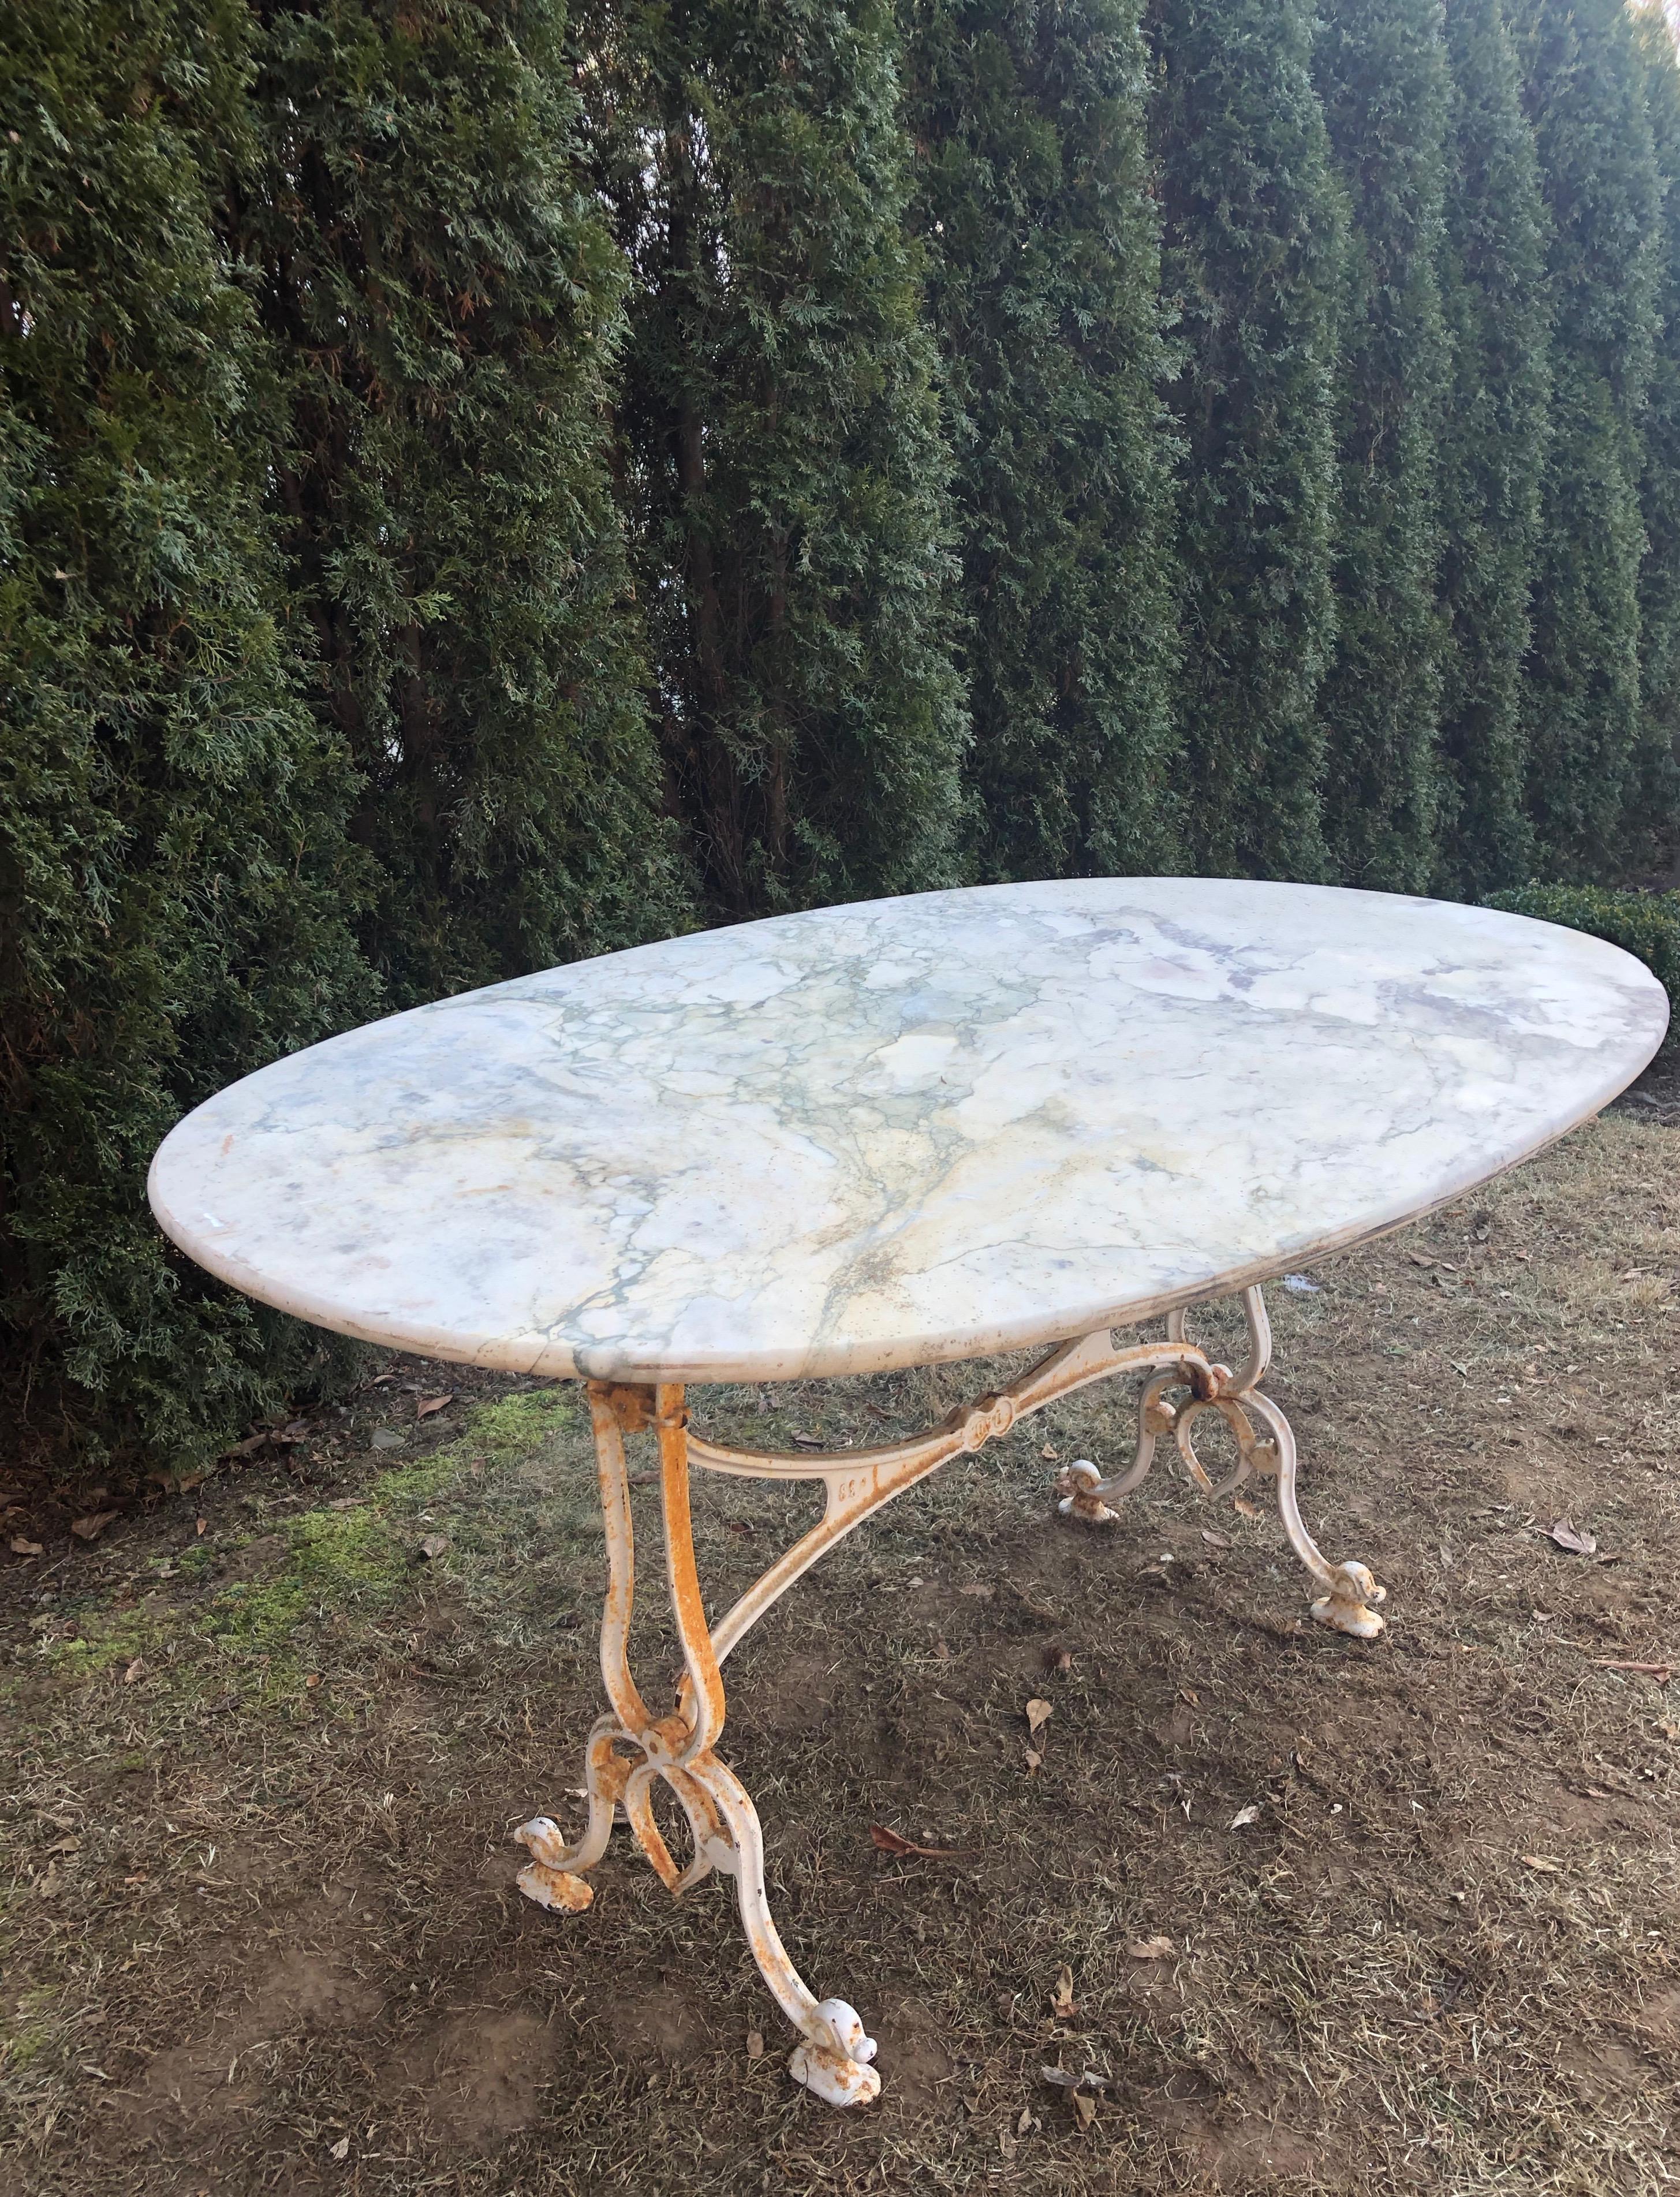 It is rare when we come across oval tables for the garden and this one is a beauty. The top is not a perfect oval, as it was handcut, but lovely nonetheless. The marble reads white with heavy grey veining and is in overall good antique condition,